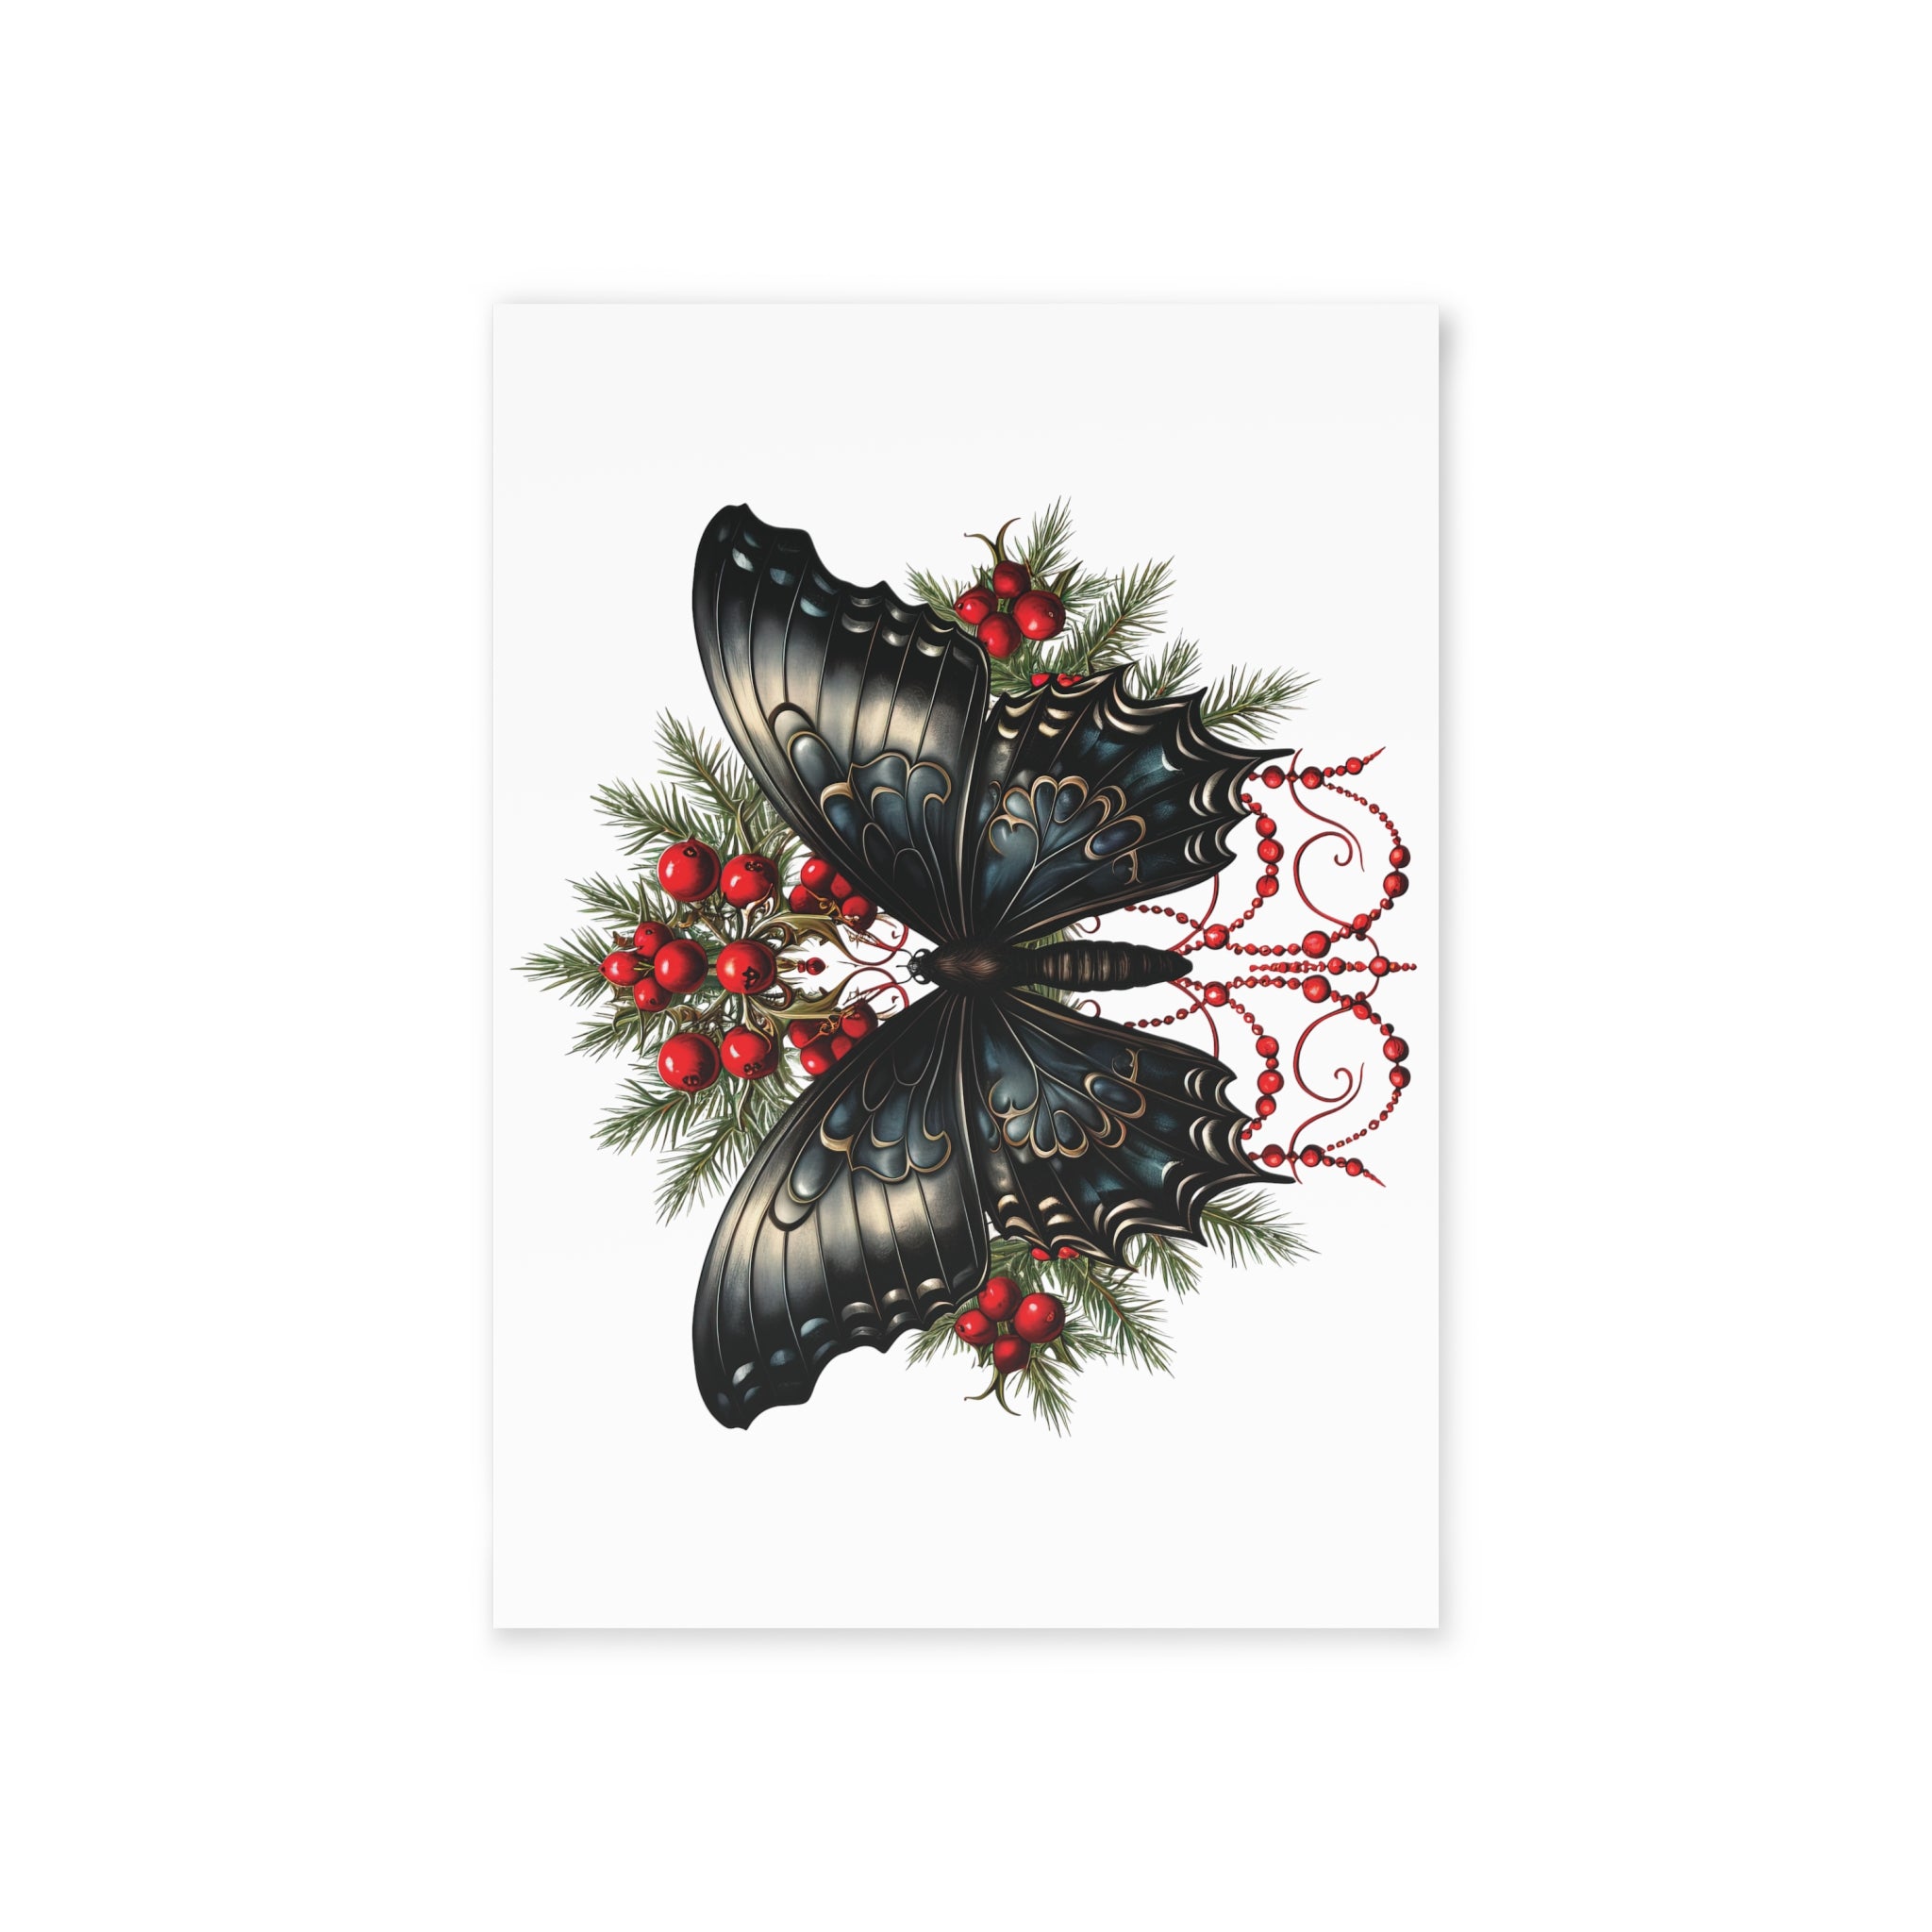 Butterfly, Vintage Gothic ~ Christmas - One-Sided Greeting Card/Art Print with Envelope, 300gsm FSC-Certified